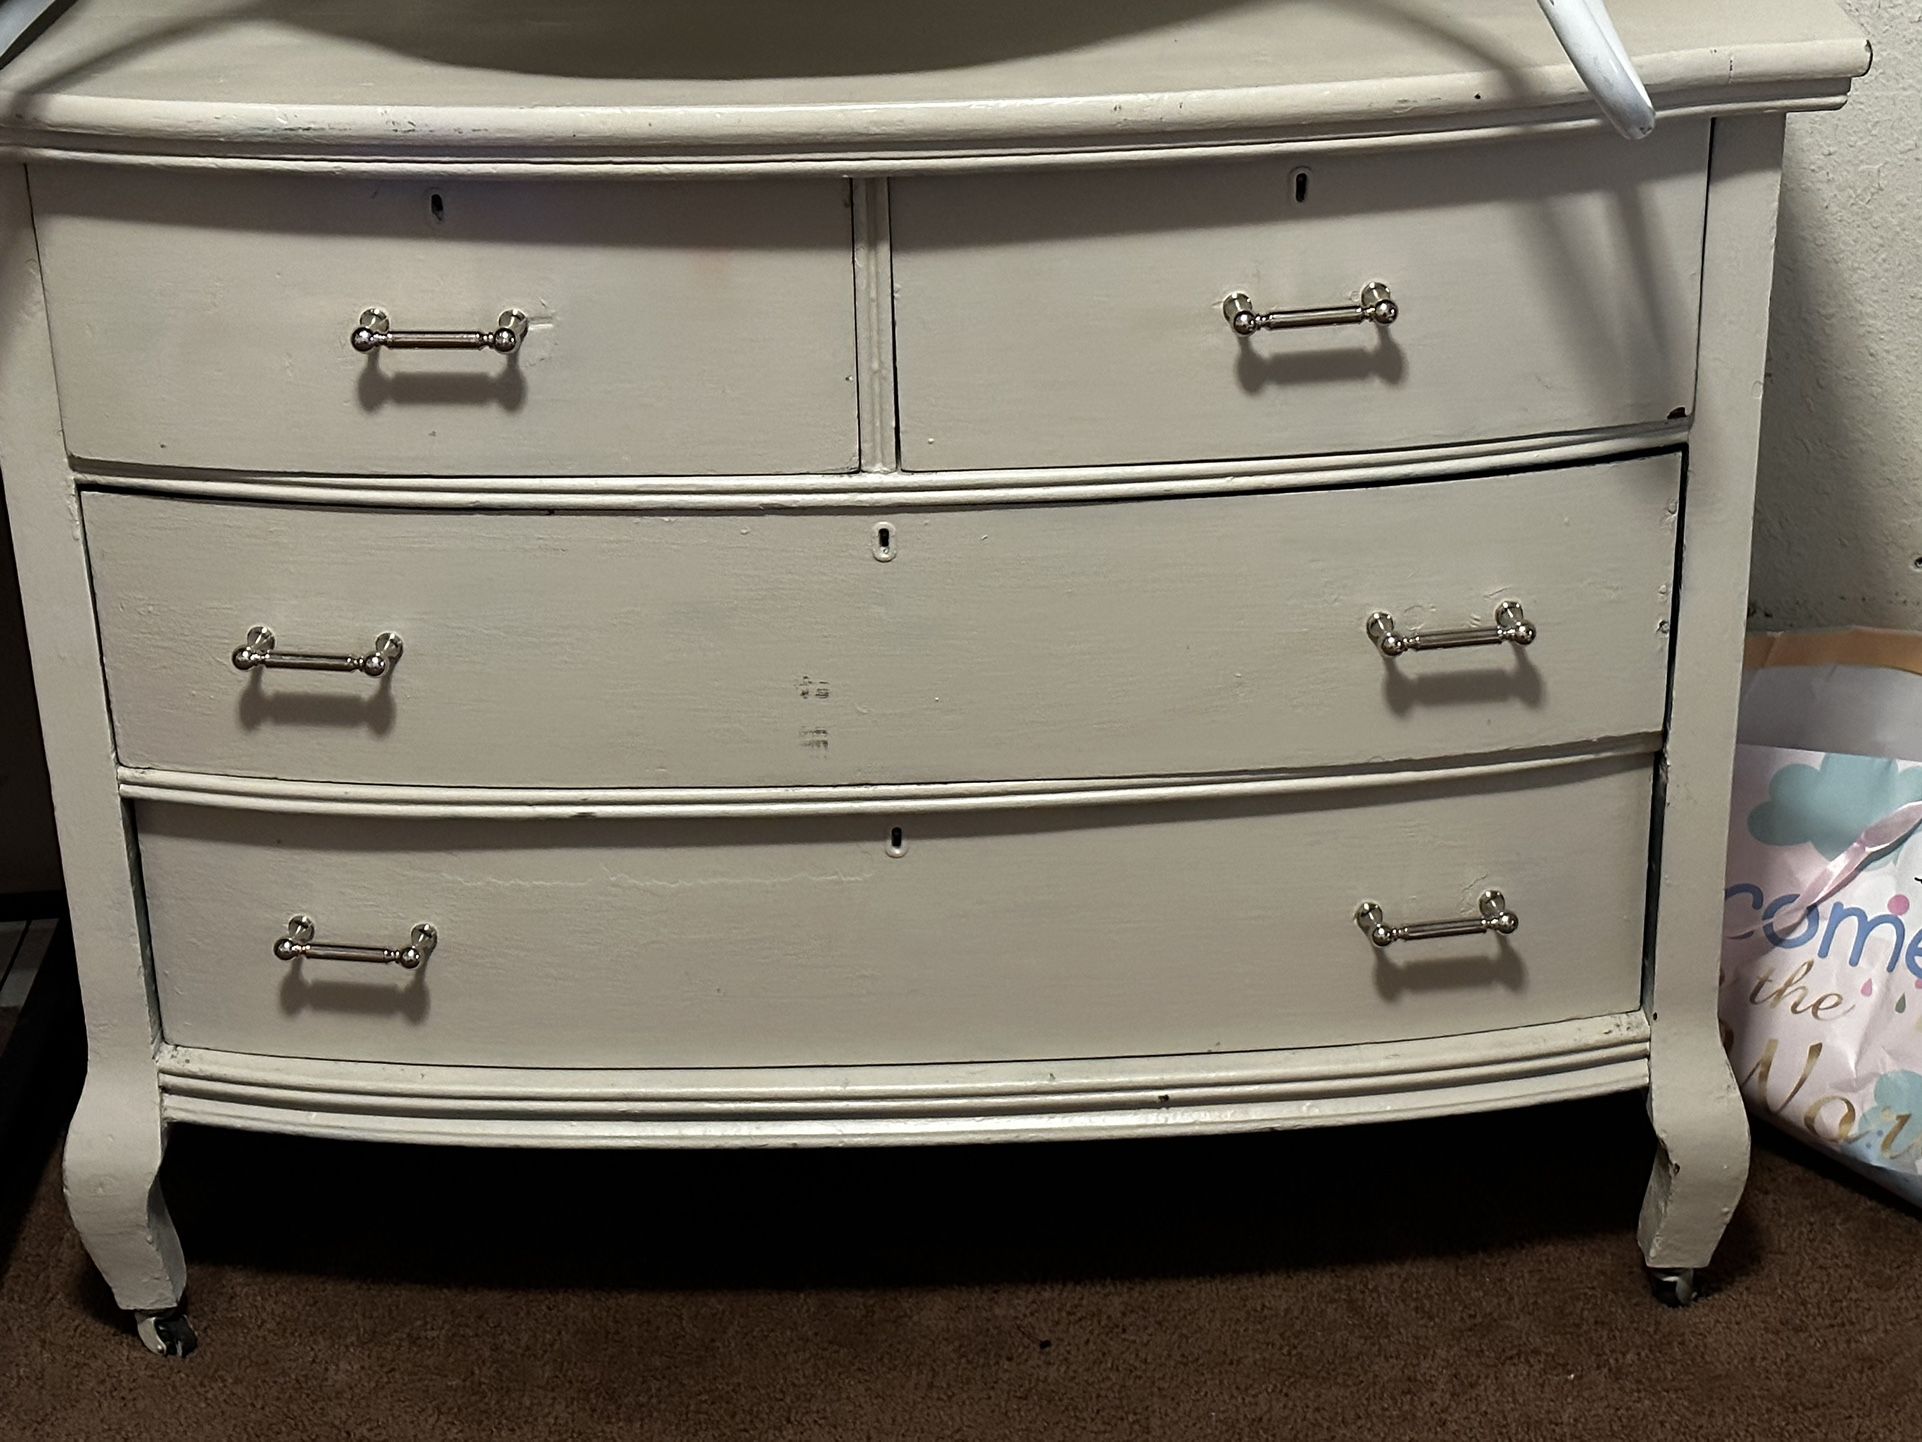 Changing Table/dresser